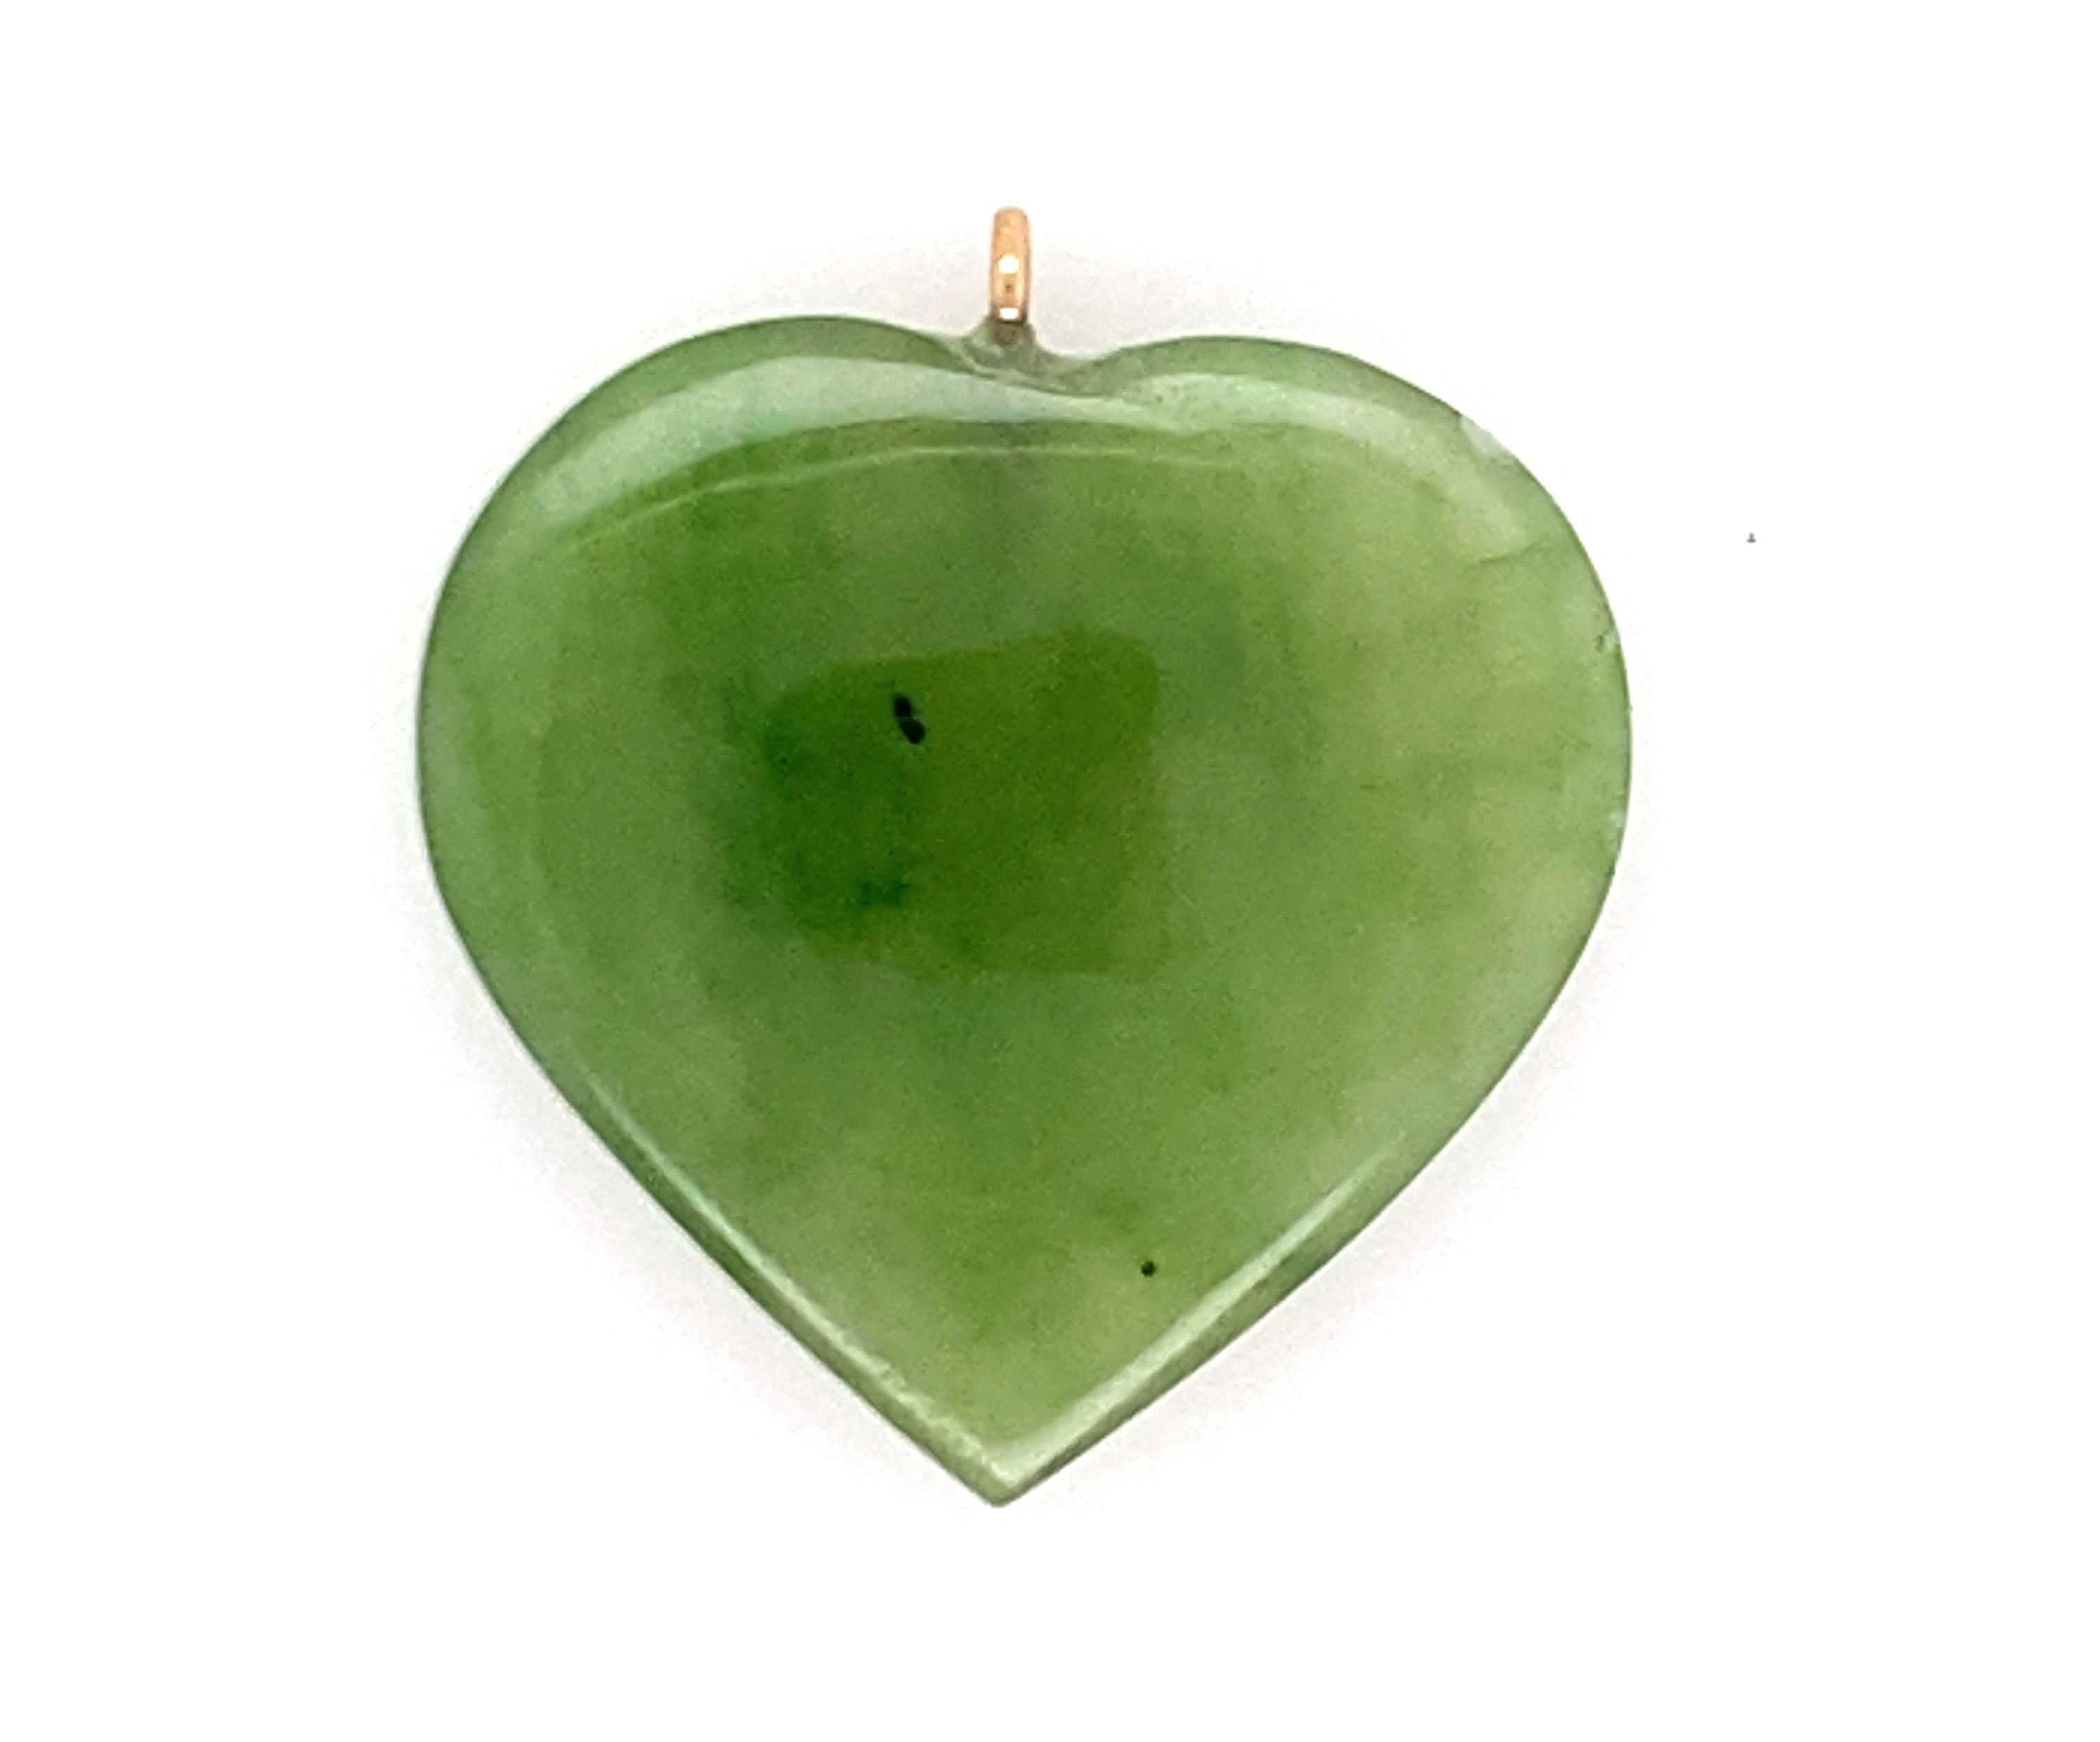 Jade Heart 14K Yellow Gold Necklace Pendant



Featuring a Beautiful Natural 20mm Heart Cut Jade Gemstone

100% Natural Gemstone

Solid 14K Yellow Gold

Simple Yet Elegant 

Excellent Condition

 

Your Pendant's Specs

Metal: 14K Yellow